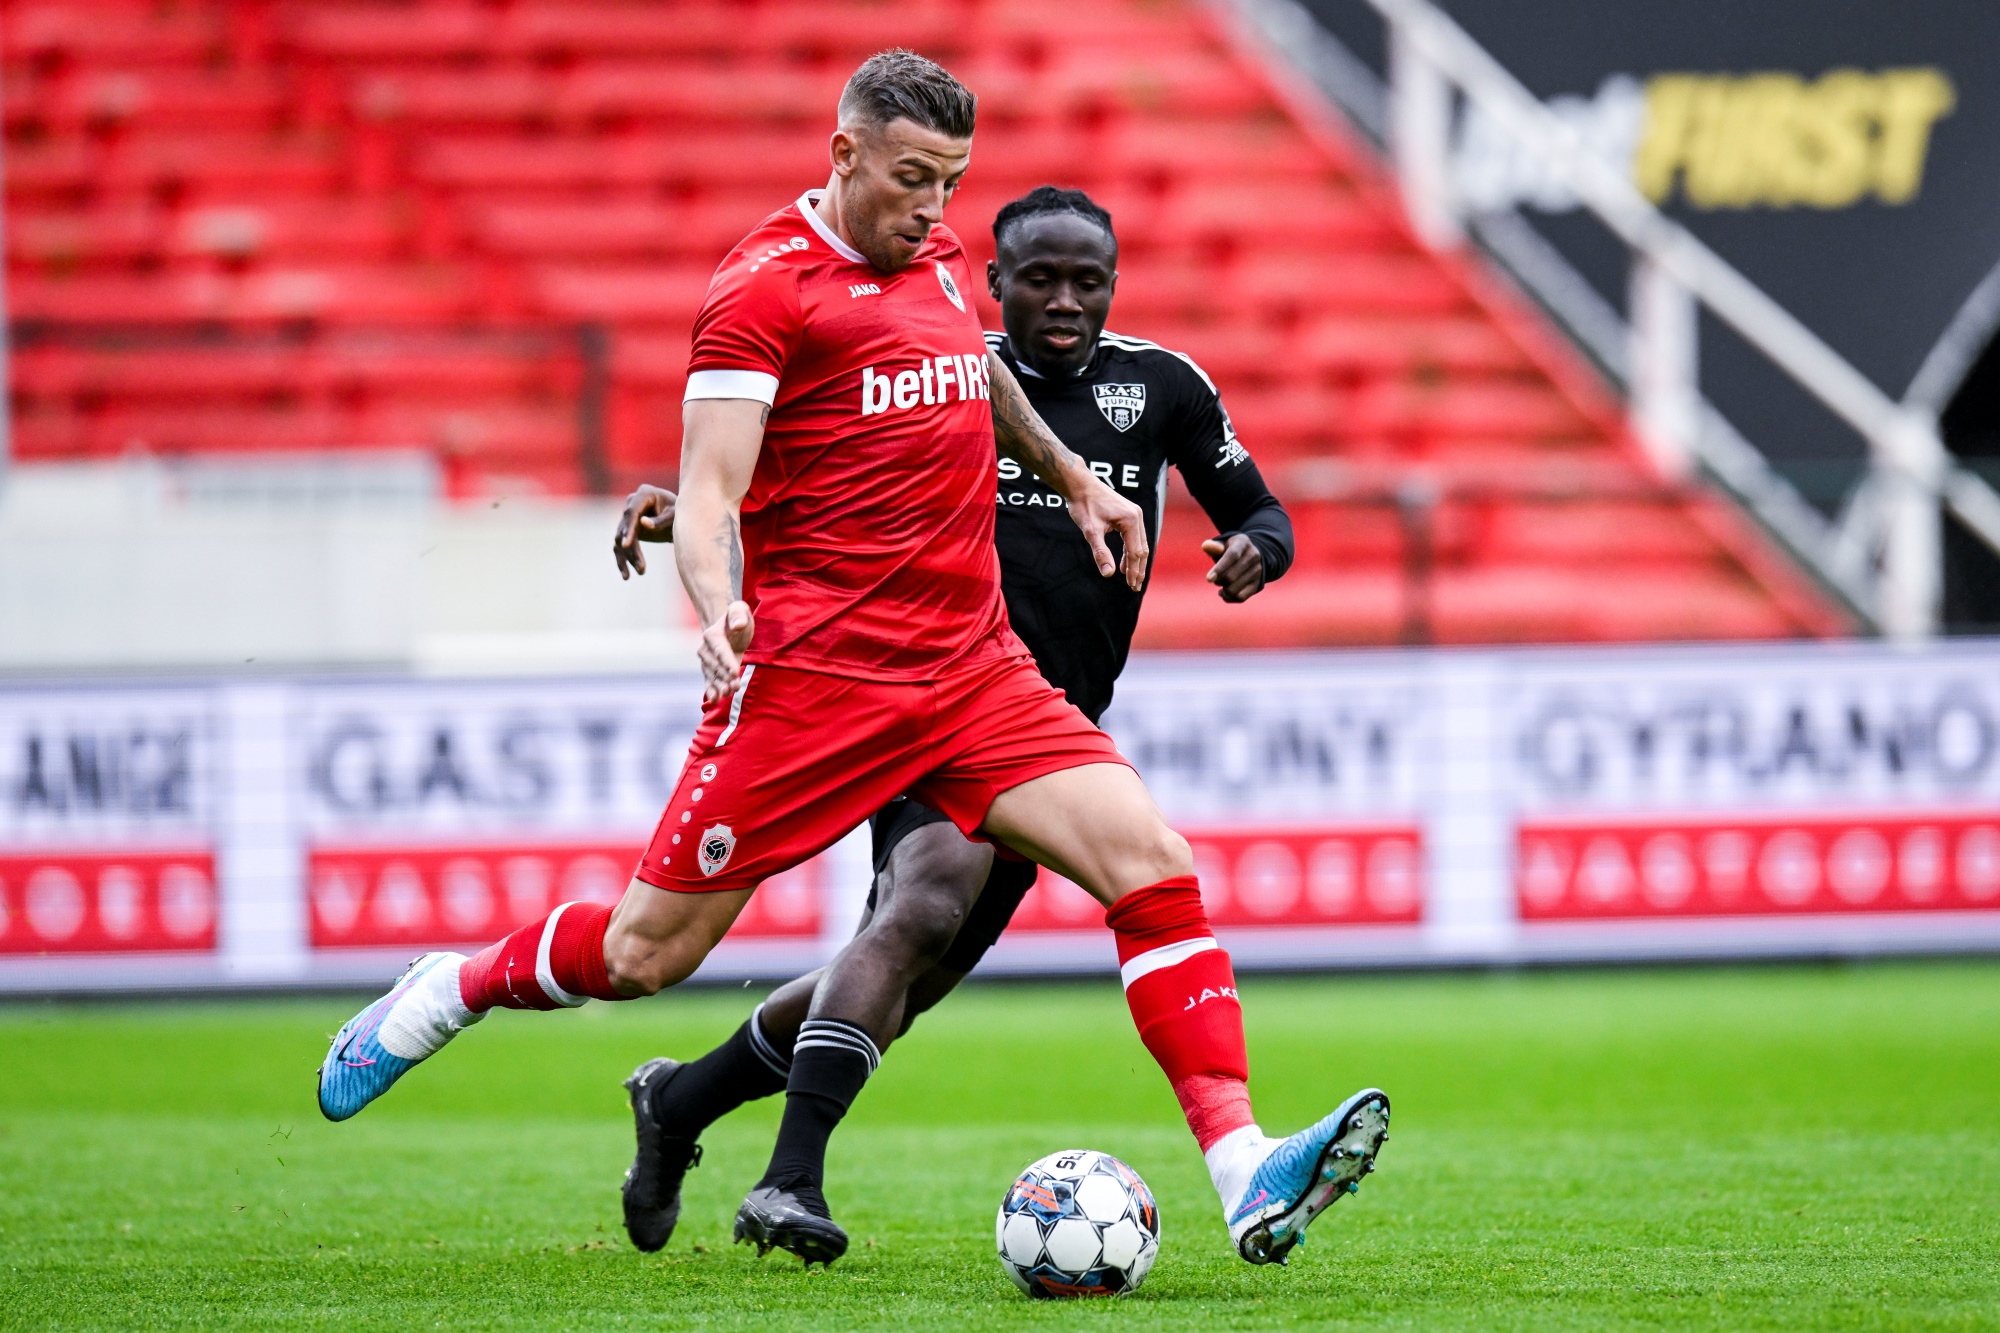 Antwerp's Toby Alderweireld and Eupen's Konan Ignace N'Dri pictured in action during a soccer match between Royal Antwerp FC and KAS Eupen, Saturday 18 February 2023 in Antwerp, on day 26 of the 2022-2023 'Jupiler Pro League' first division of the Belgian championship. BELGA PHOTO TOM GOYVAERTS